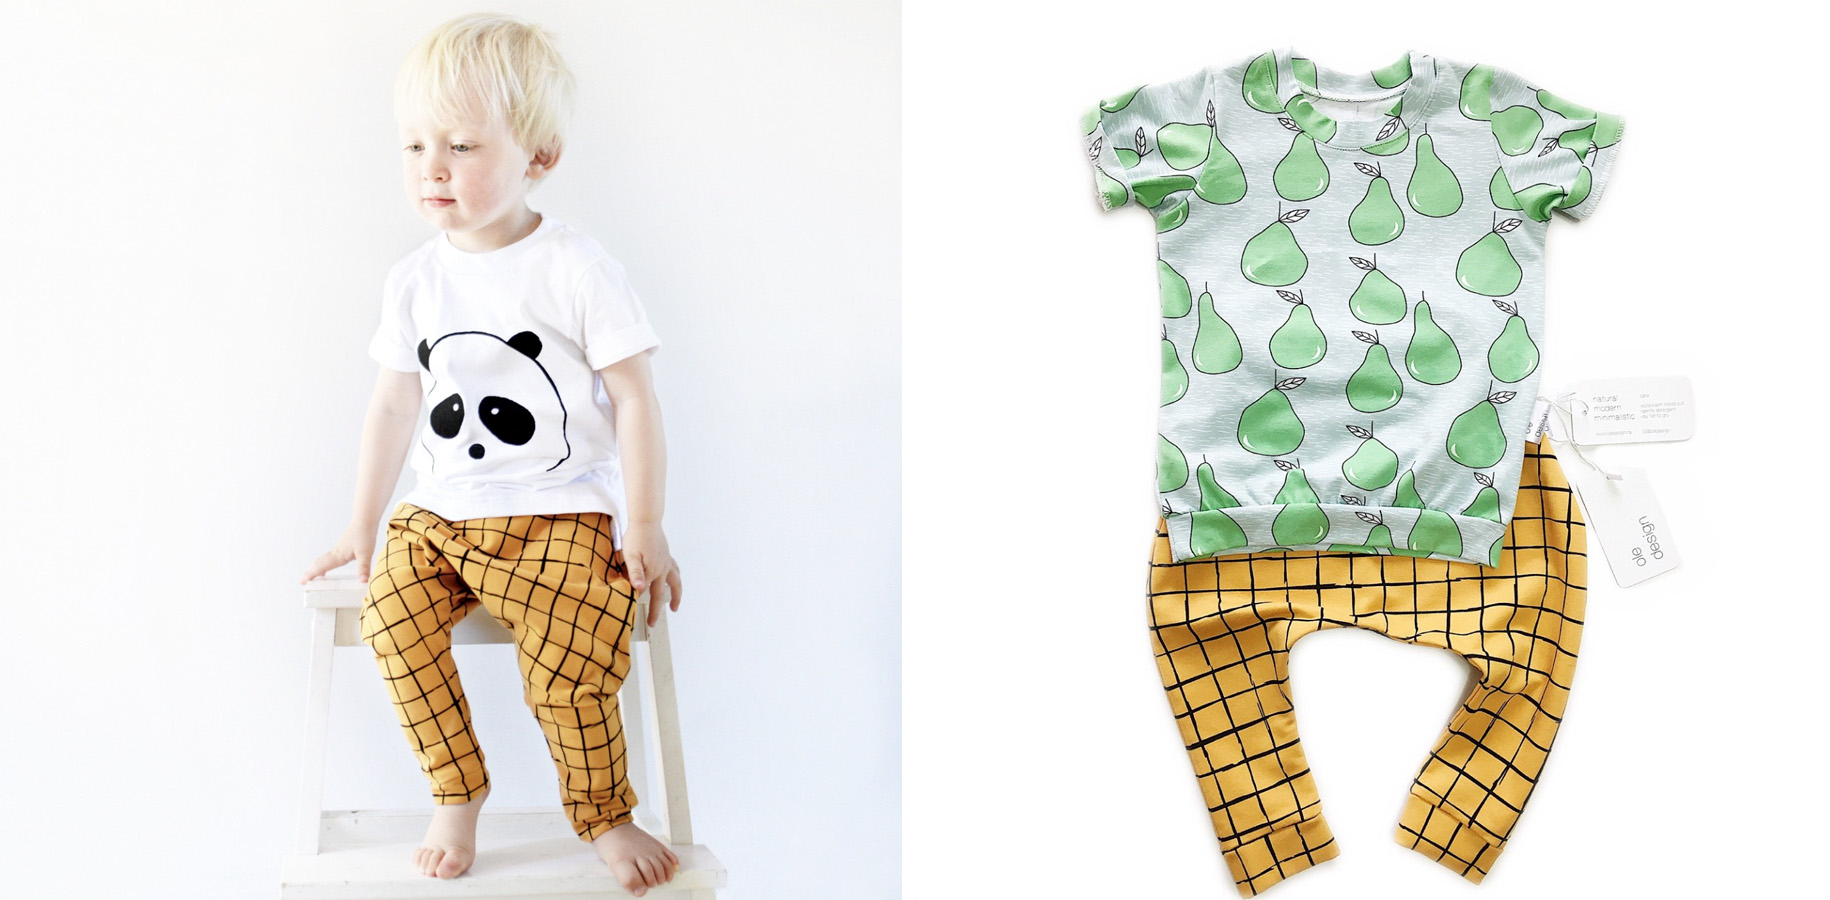 Ole designs specializes in modern and ethical children's apparel